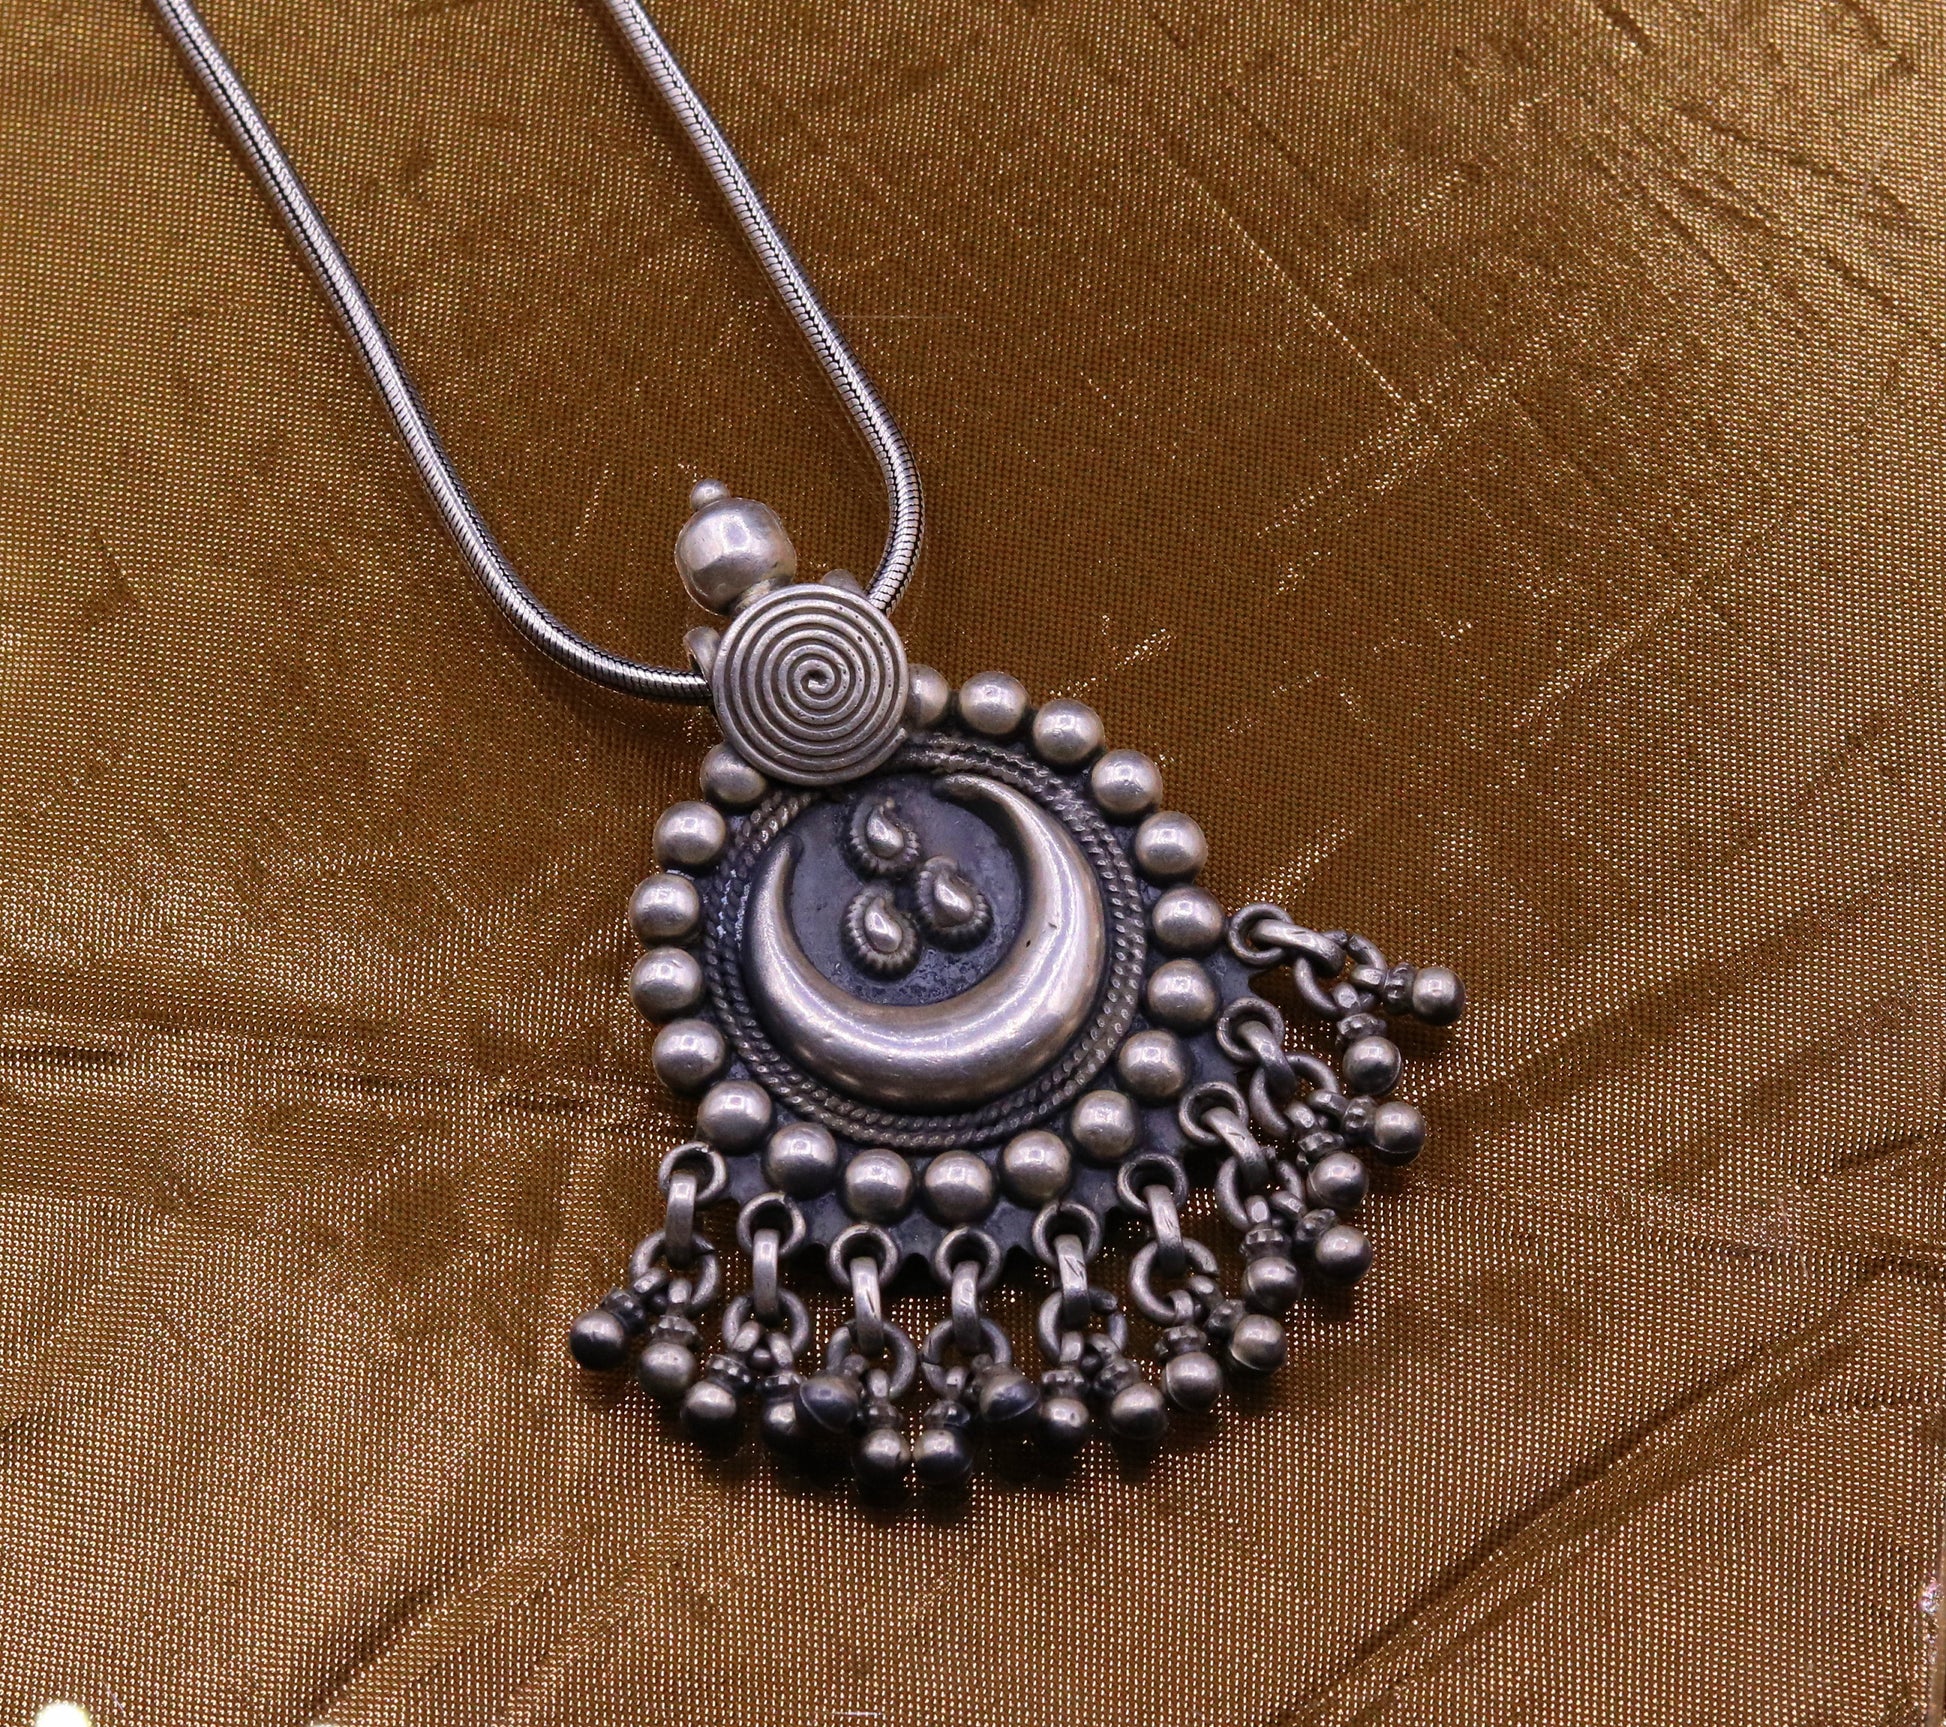 Vintage design handmade 925 sterling silver pendant, charm pendant,moon pendant oxidized necklace tribal ethnic temple jewelry nsp336 - TRIBAL ORNAMENTS